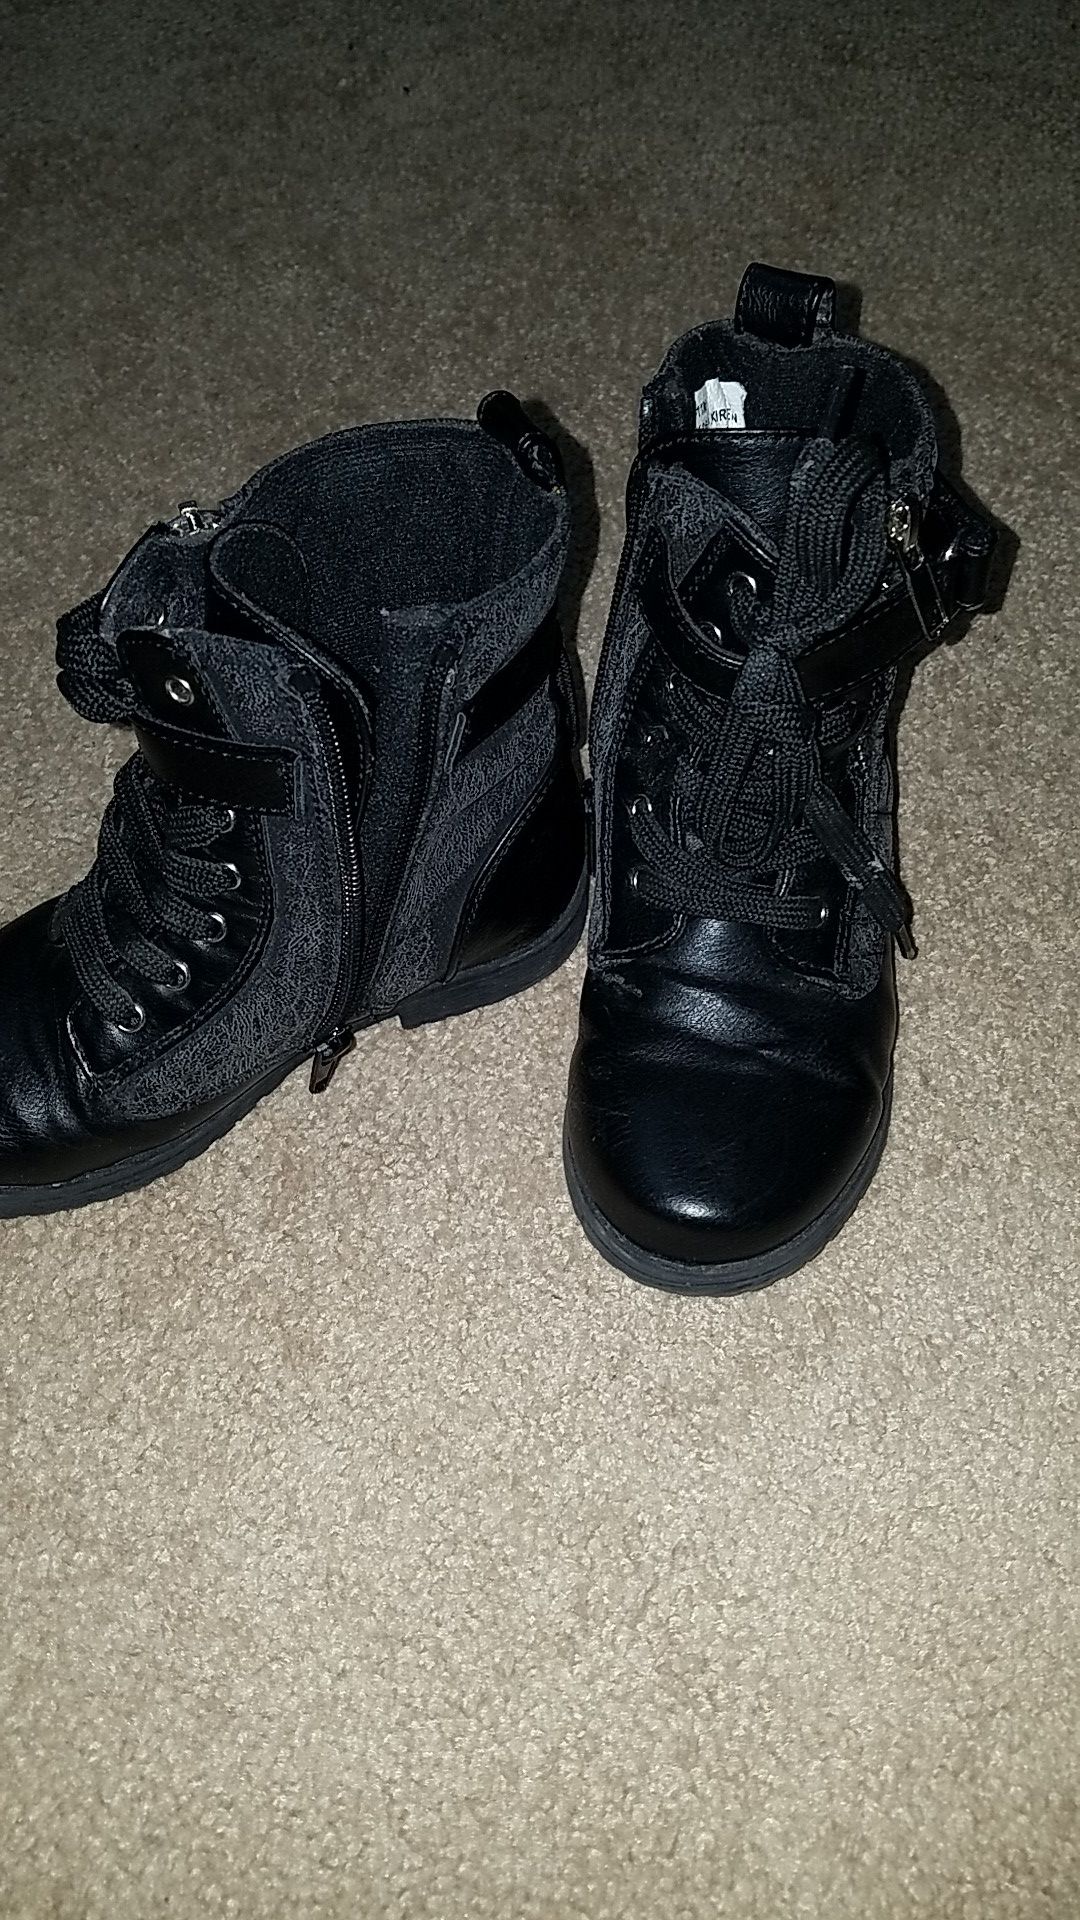 Toddler girl size 11 boots